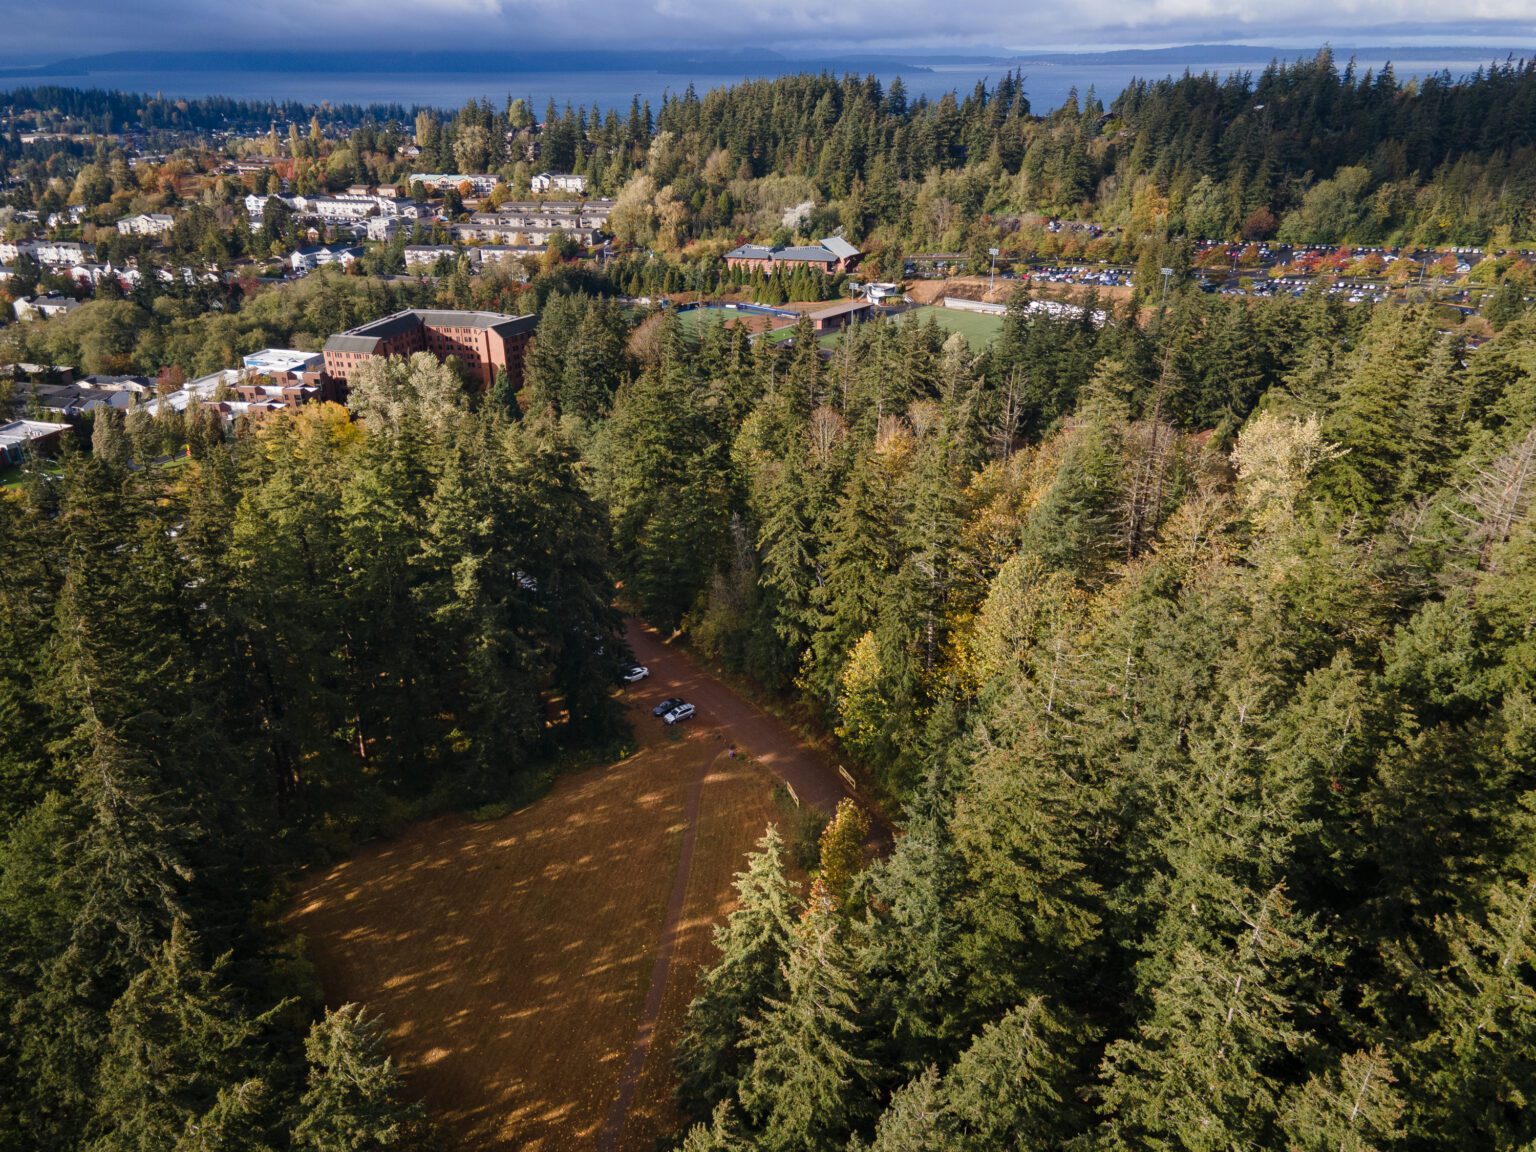 Federal funding will provide a kitchen and other furnishing in the Coast Salish-style longhouse planned for the Western Washington University campus. The university will build the House of Healing in a clearing in the Sehome Arboretum.